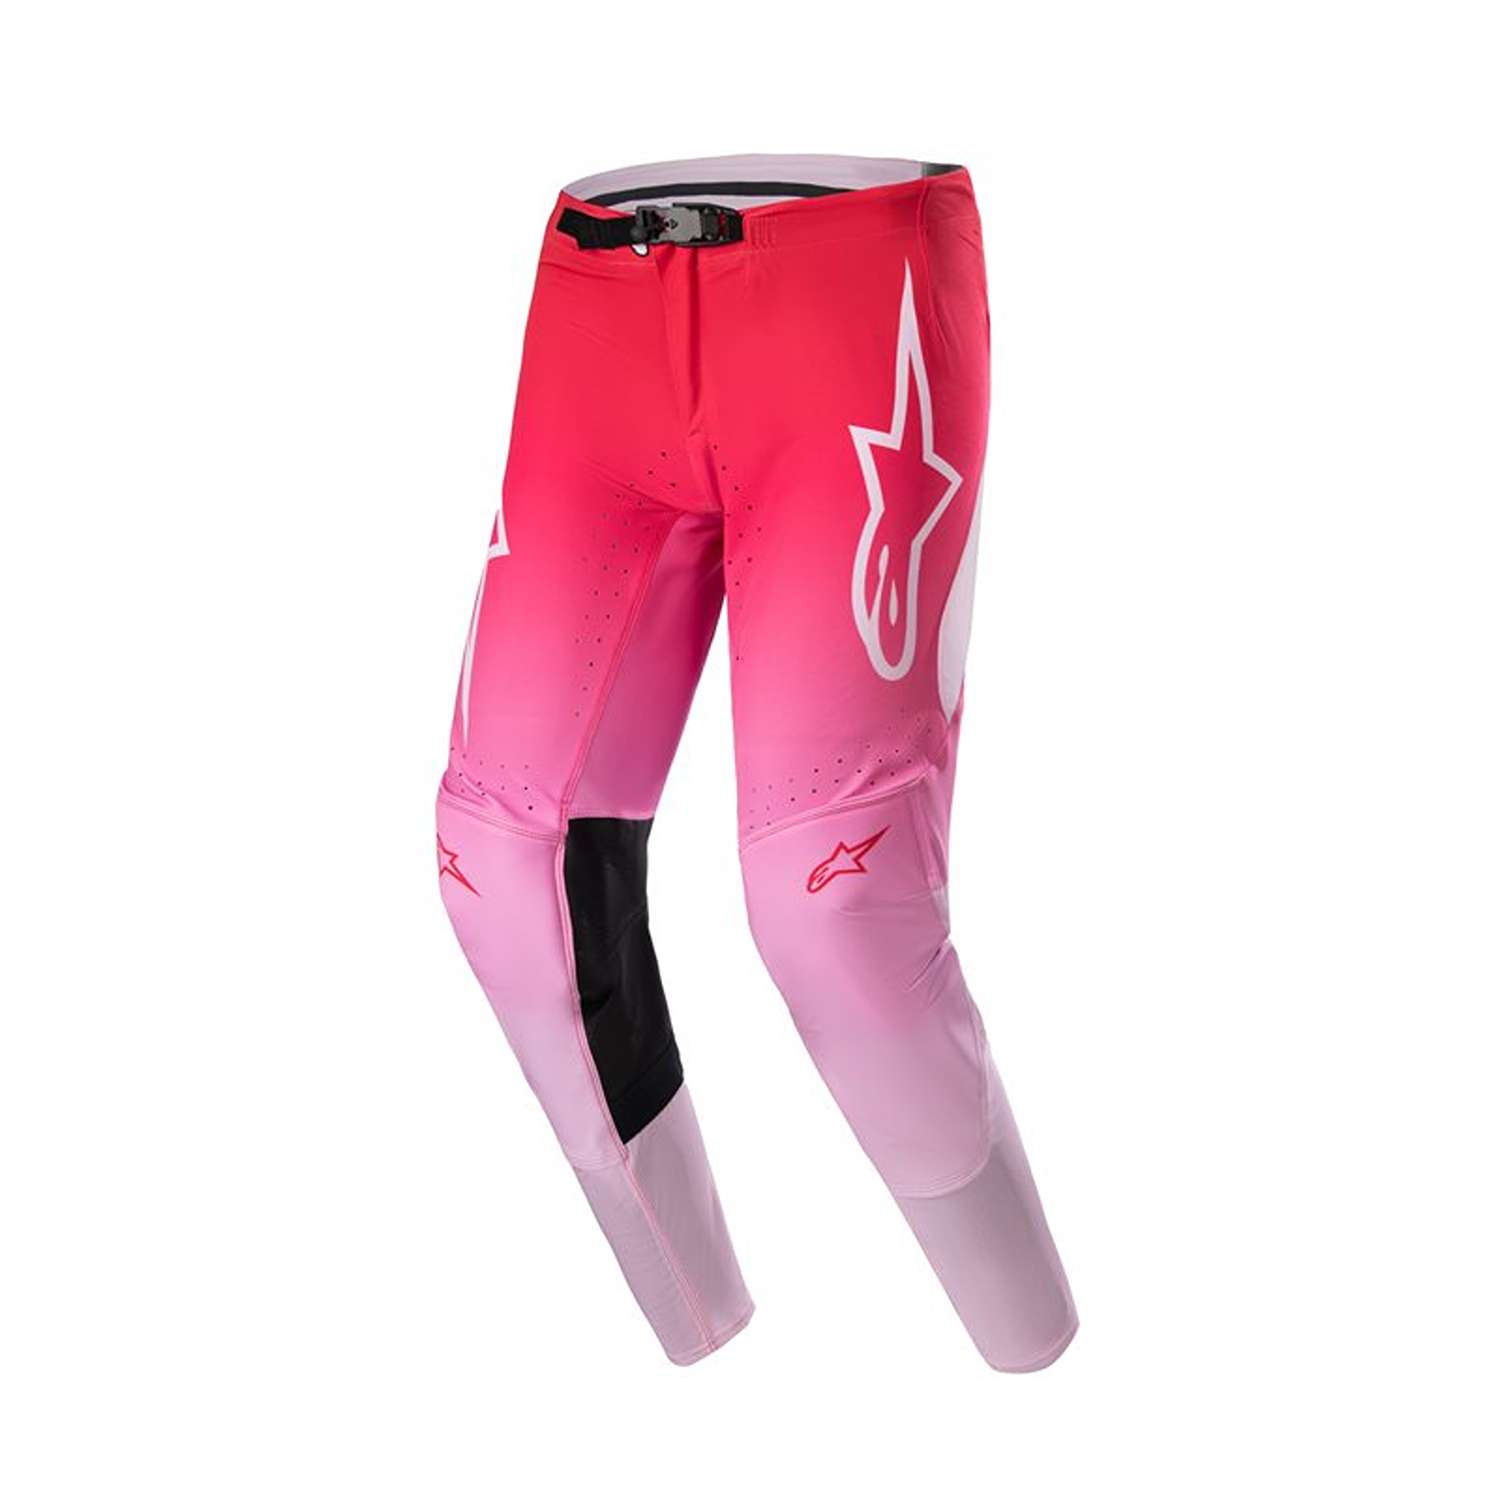 Image of Alpinestars Supertech Dade Pants Red Berry Lilac Size 40 ID 8059347265773